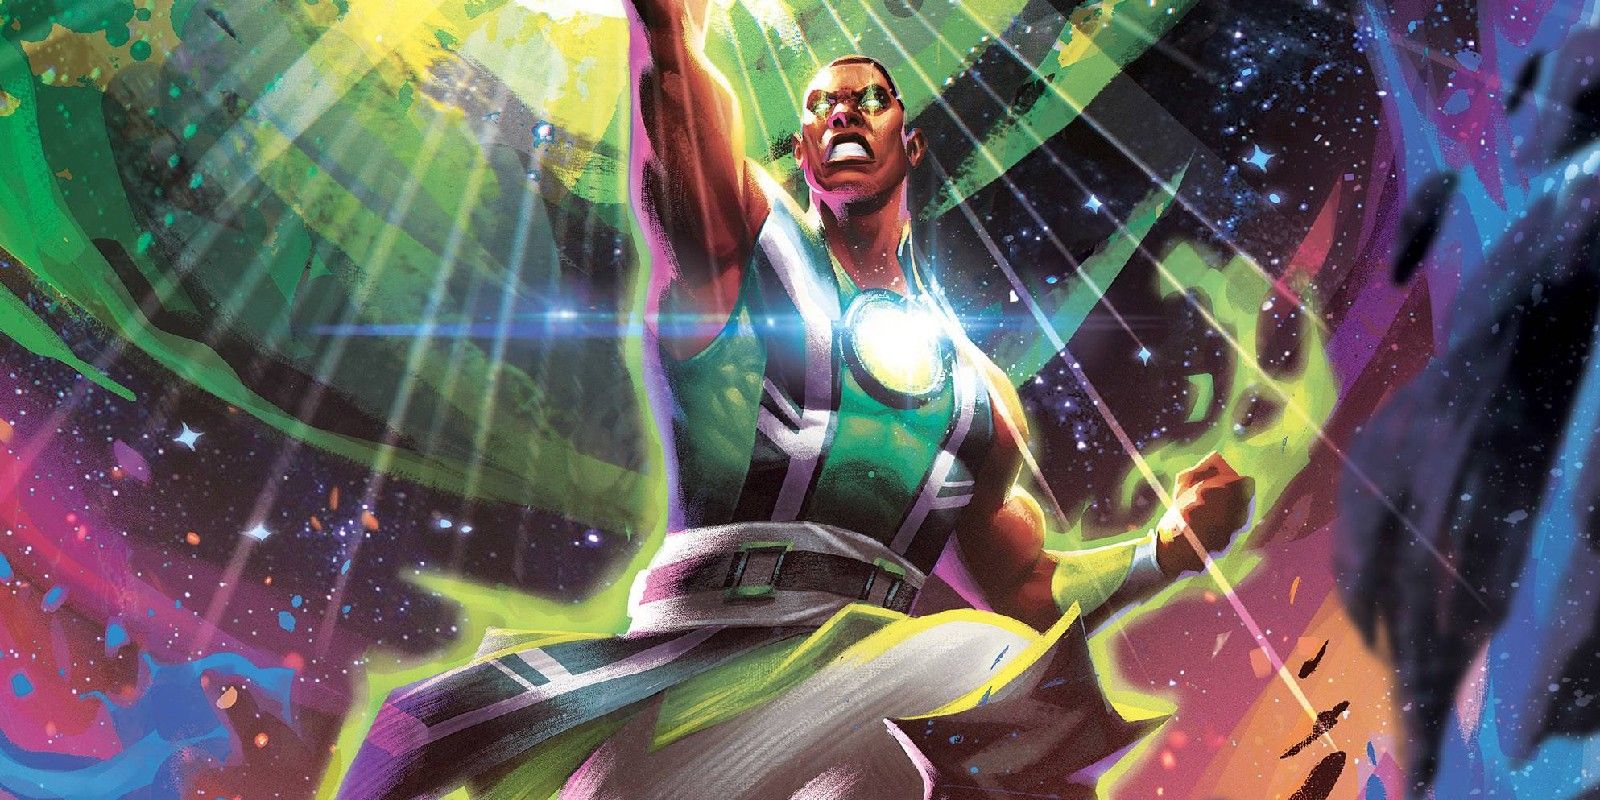 Green Lantern John Stewart Standing Triumphantly In Front of Space Background